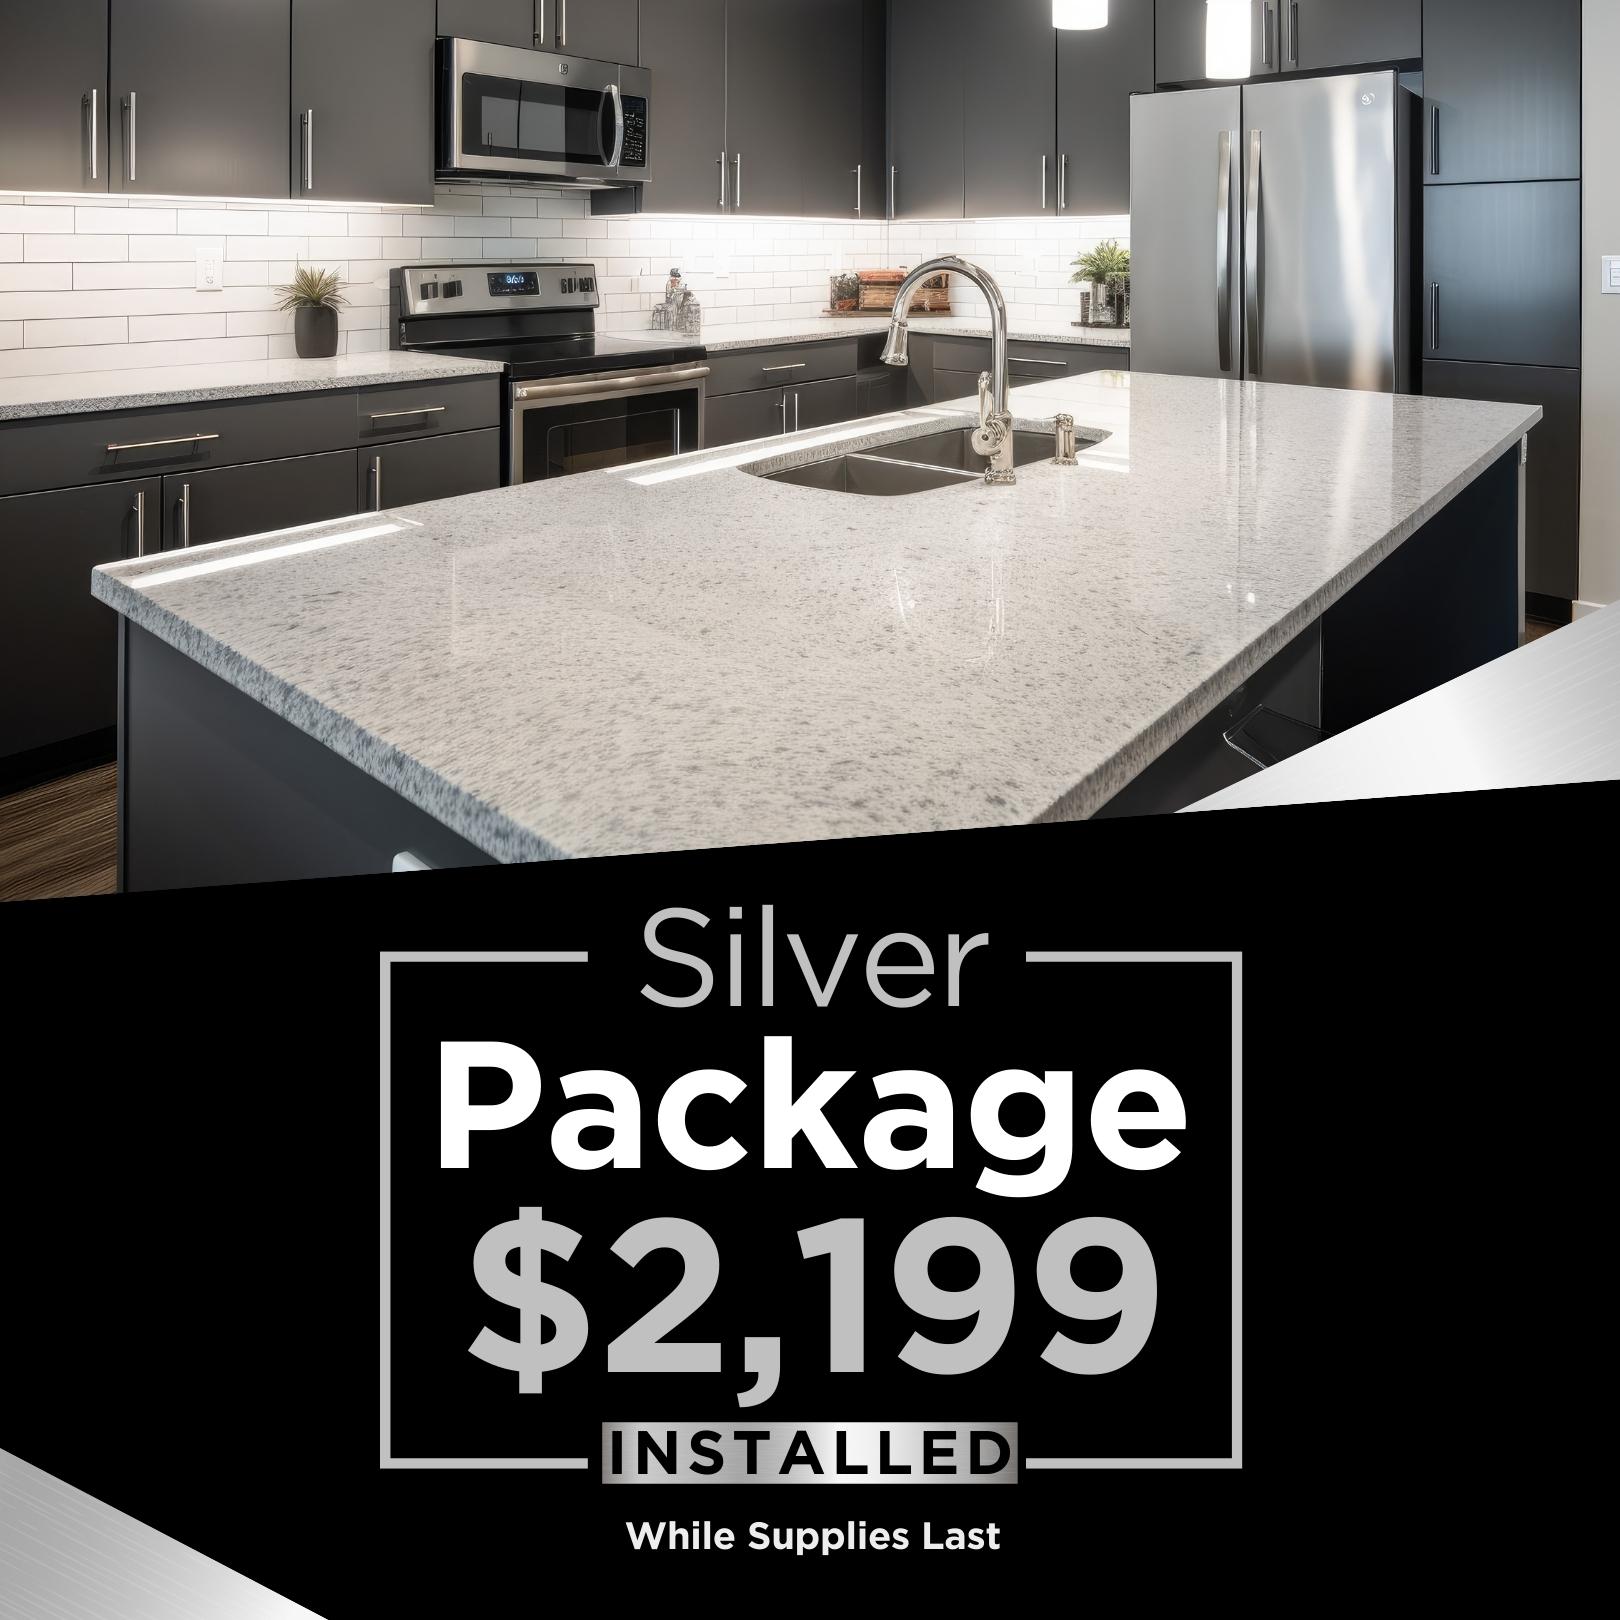 Charleston - Square - Silver Package $2,199